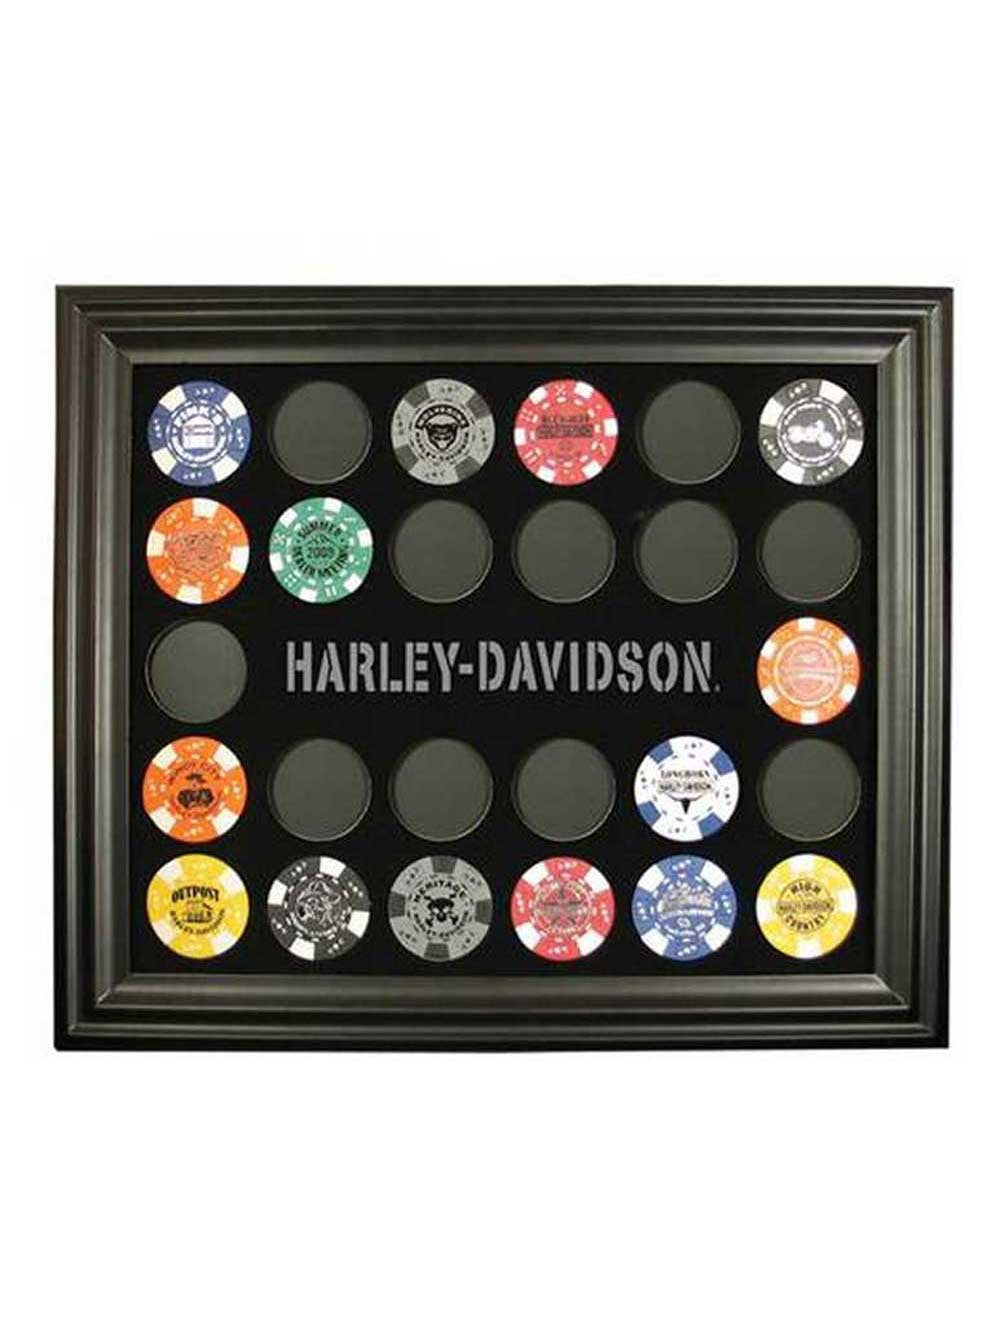 CHIP STANDING DISPLAY  * SET OF 5 CLEAR POKER CHIP EASELS 